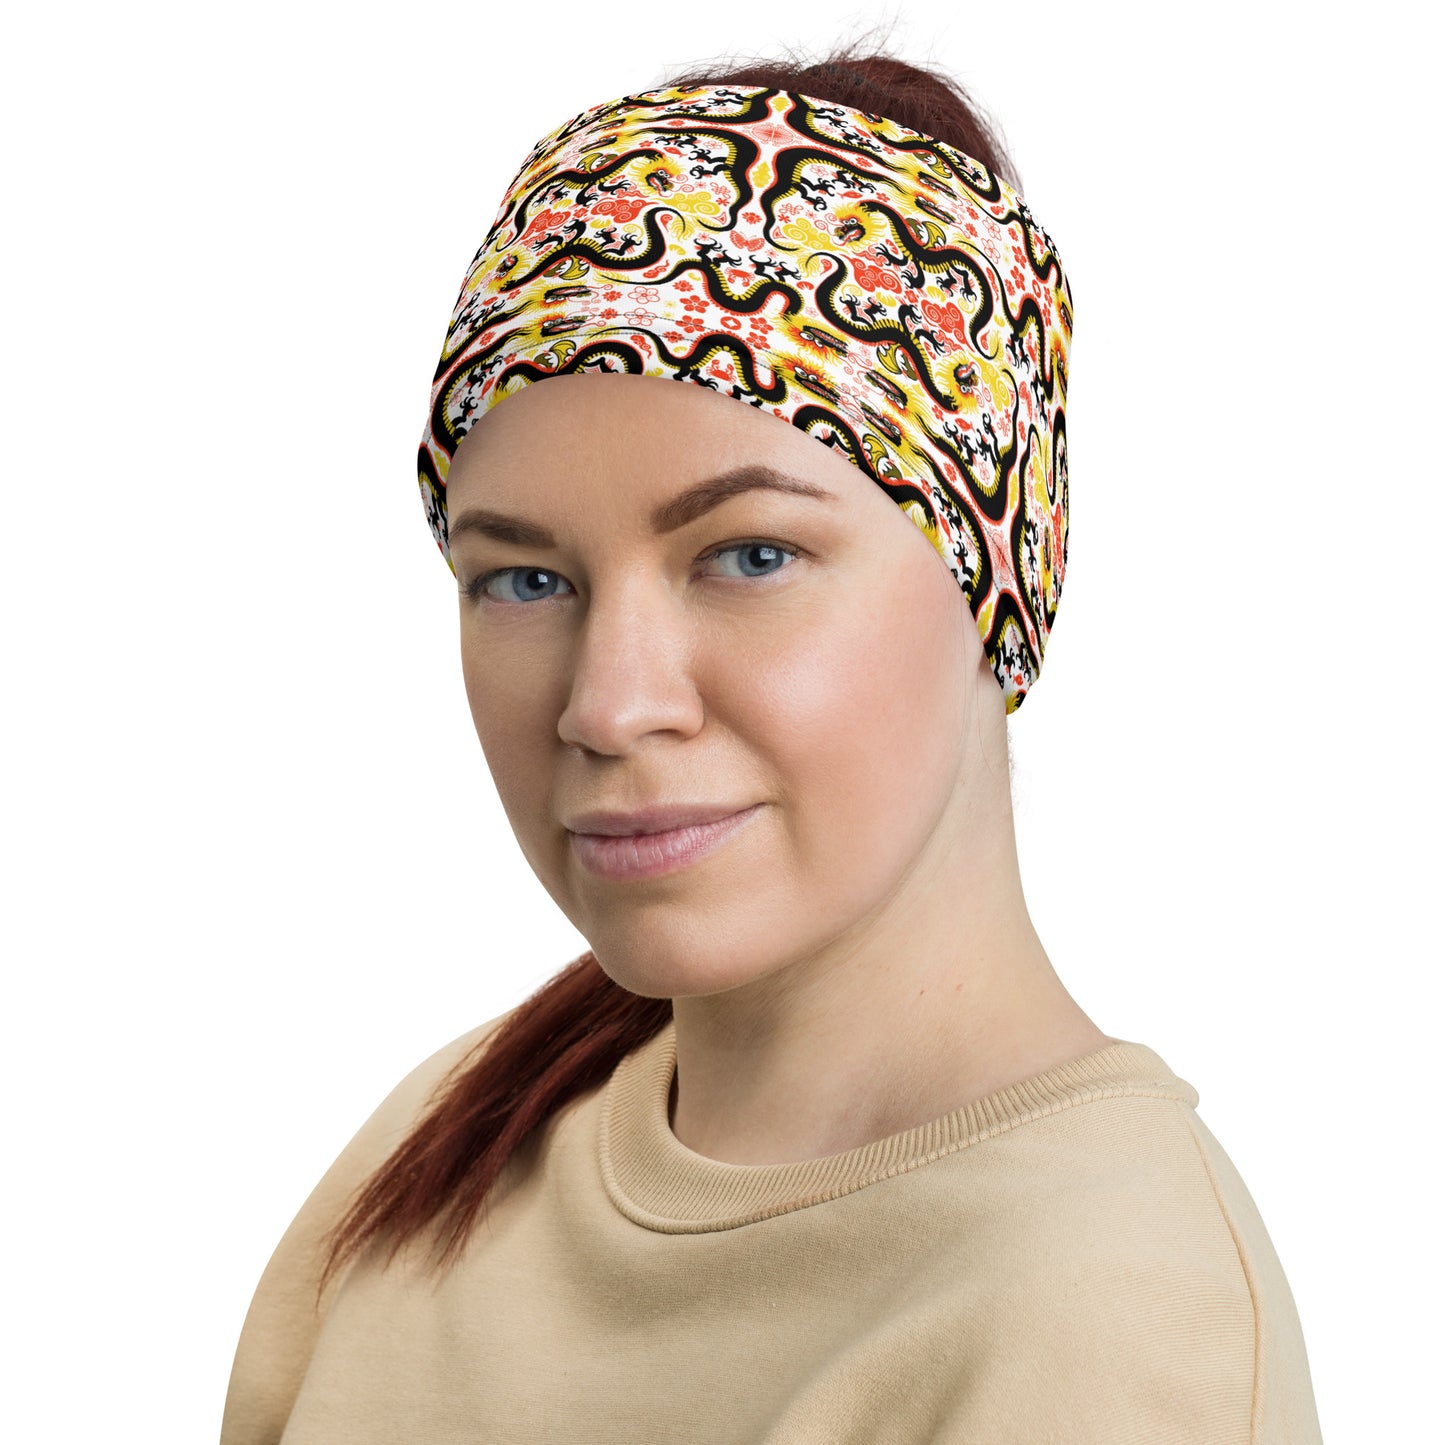 Beautiful woman wearing Neck Gaiter All-over printed with Legendary Chinese dragons pattern art. Headband